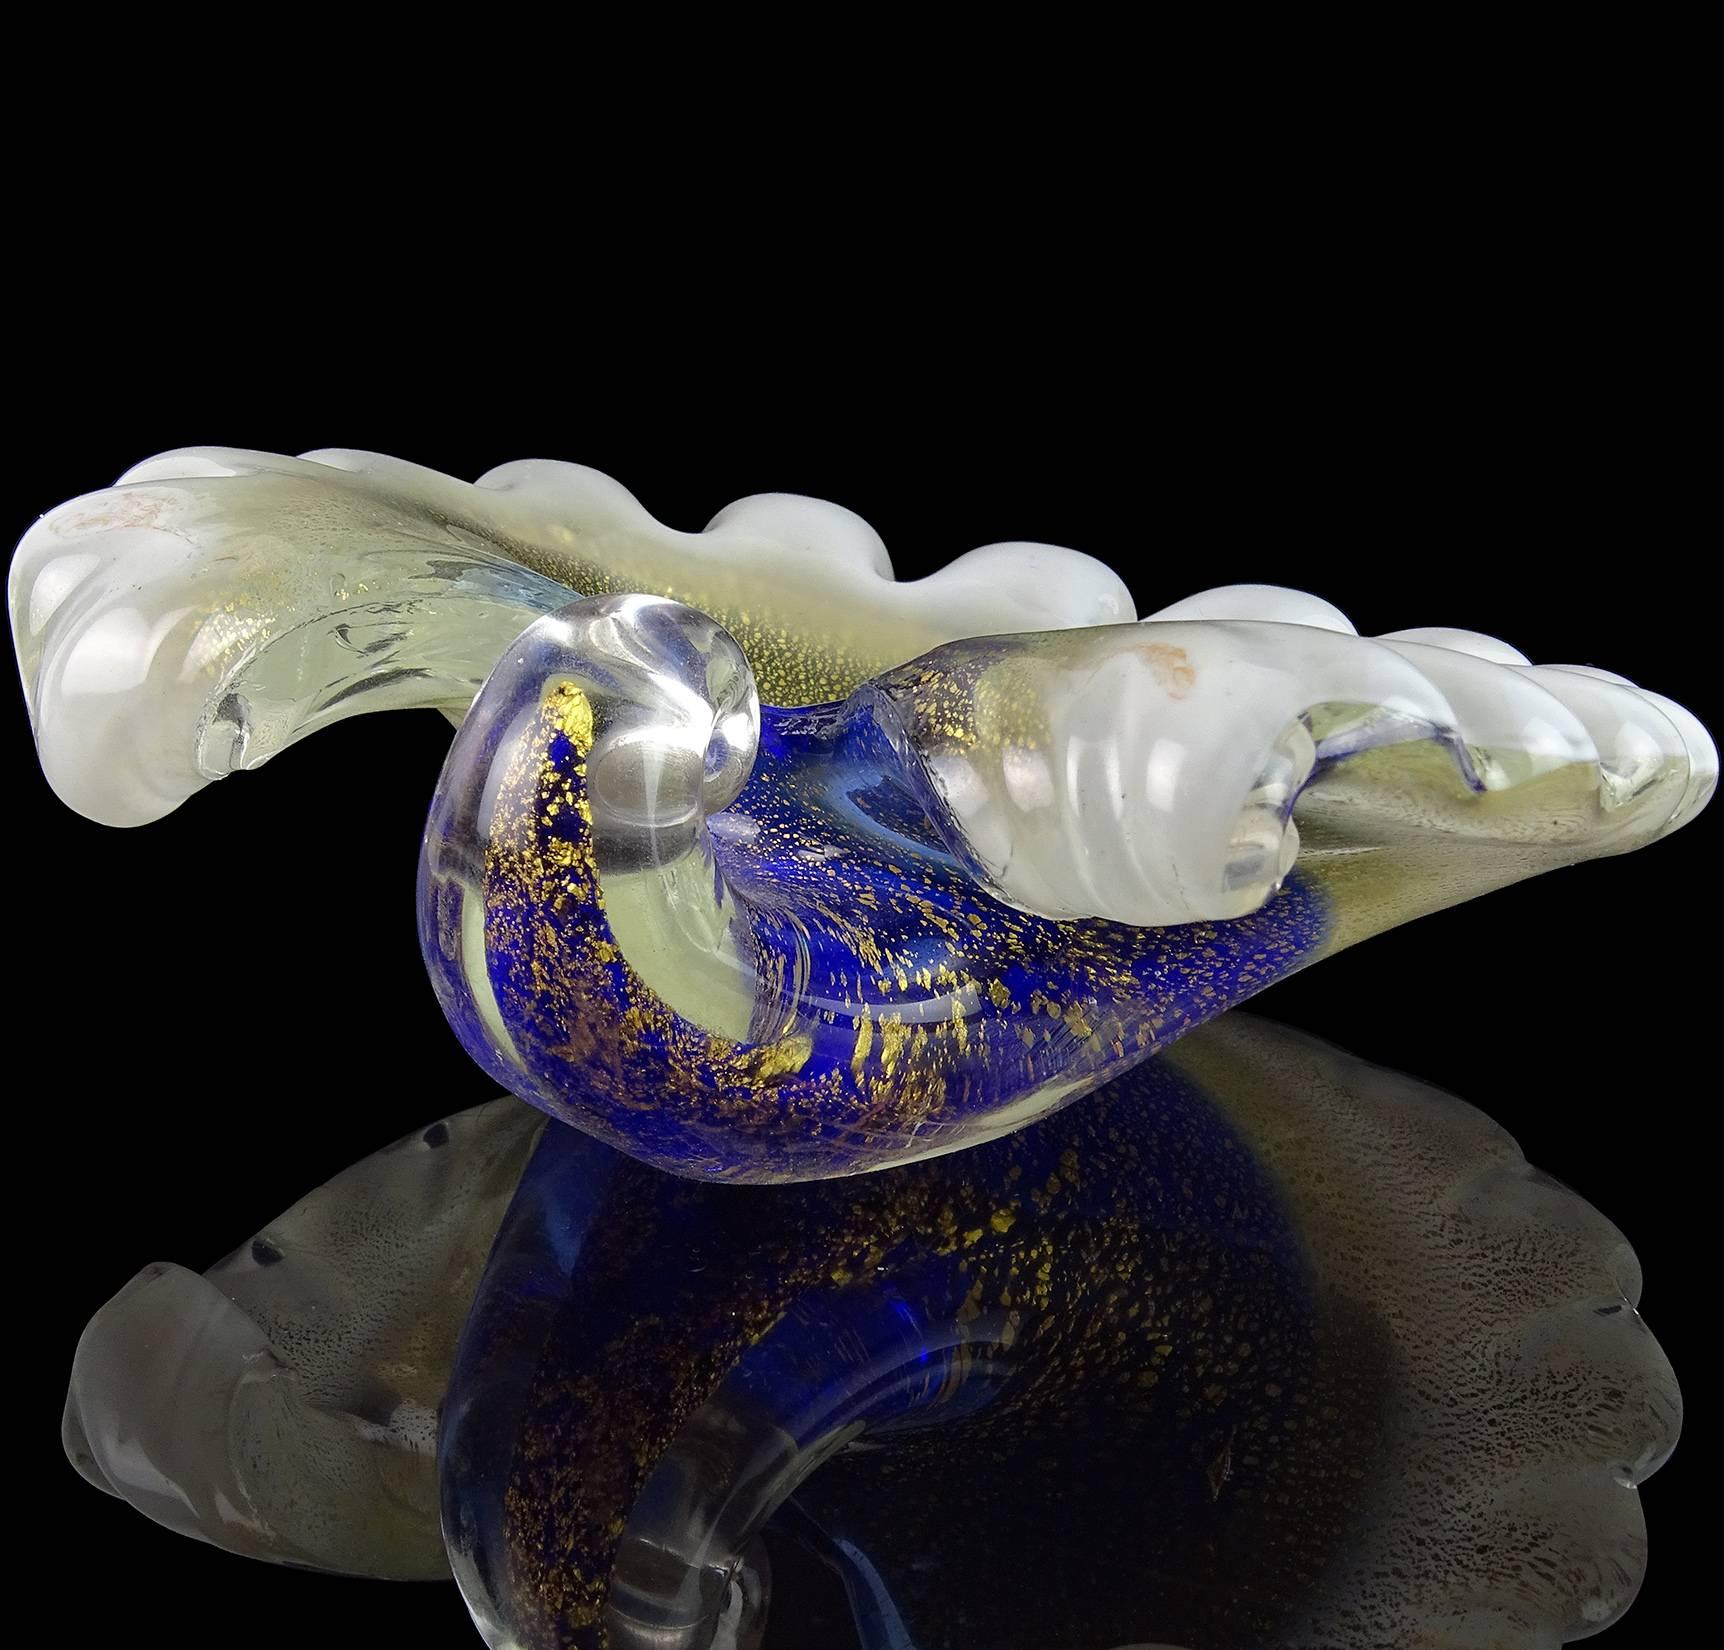 Beautiful vintage Murano hand blown blue, white and gold flecks art glass seashell bowl / sculpture. Created in the manner of the Barovier e Toso Company. It is profusely covered in gold leaf on the outside. Can be used as a display piece on any